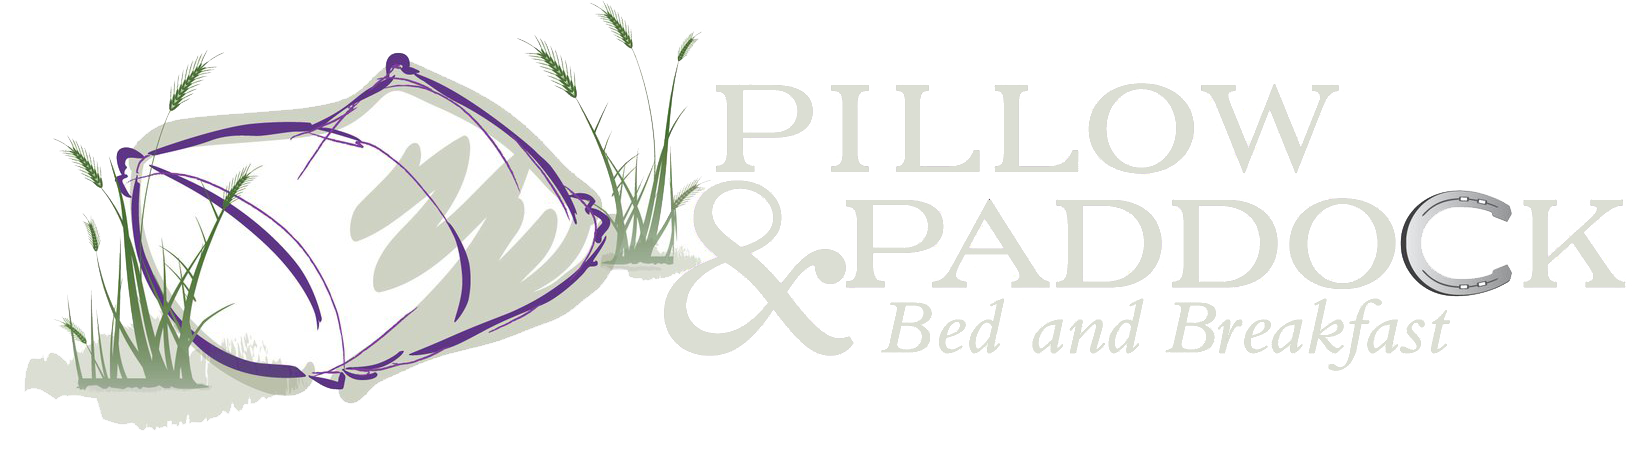 pillow and paddock bed and breakfast logo